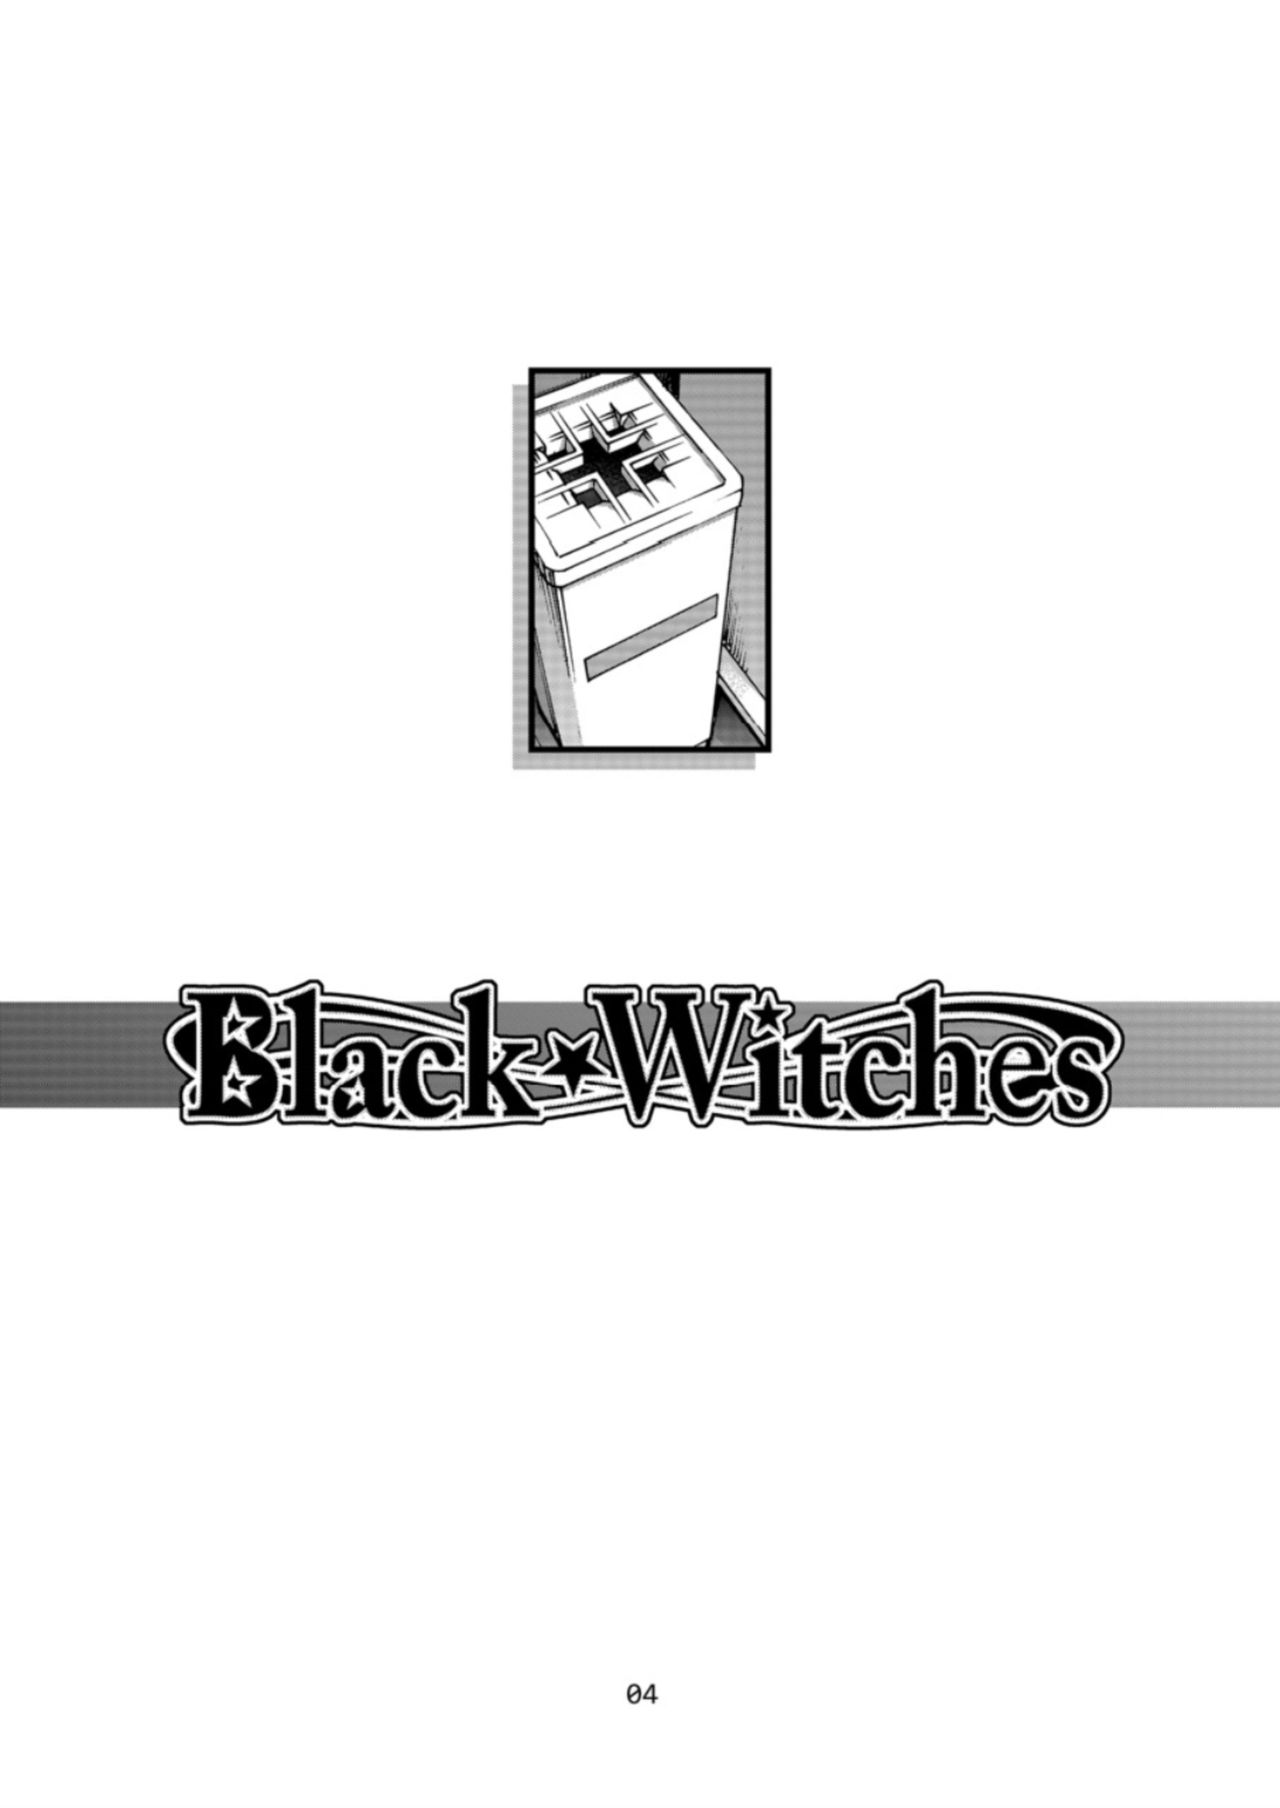 [CELLULOID-ACME (Chiba Toshirou)] Black Witches 2 [Digital] page 3 full